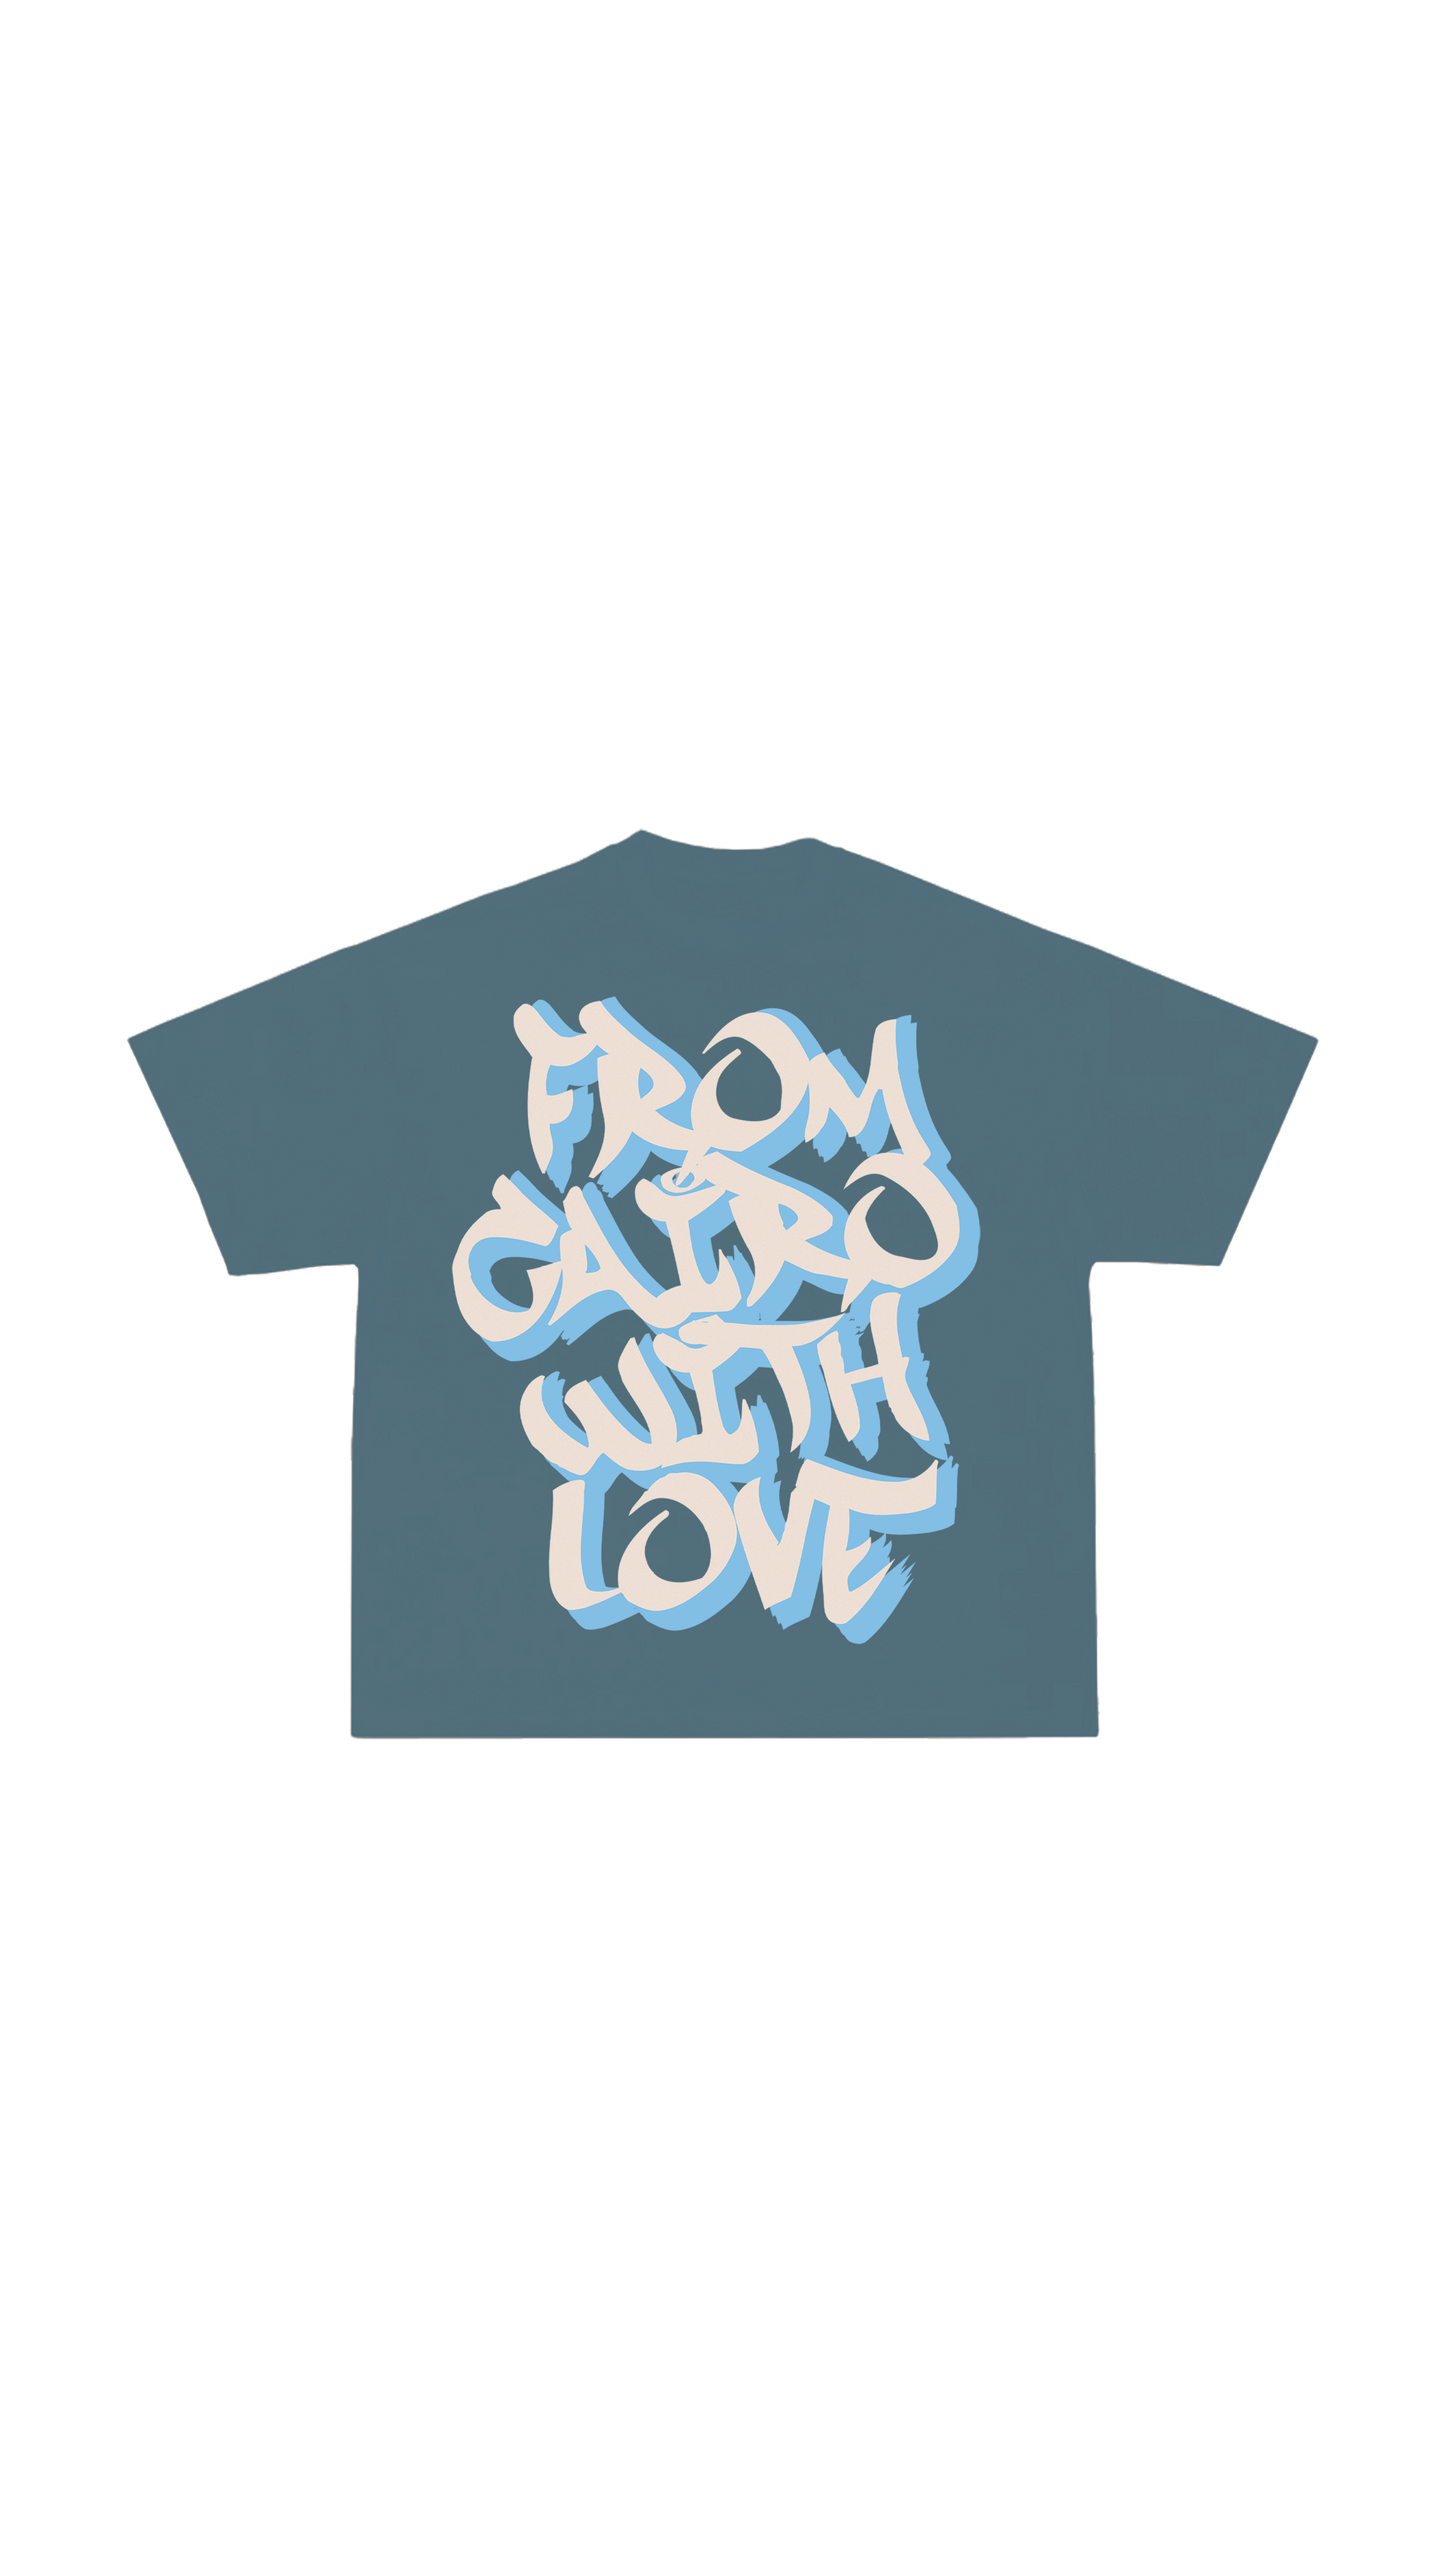 From Cairo With Love Tee